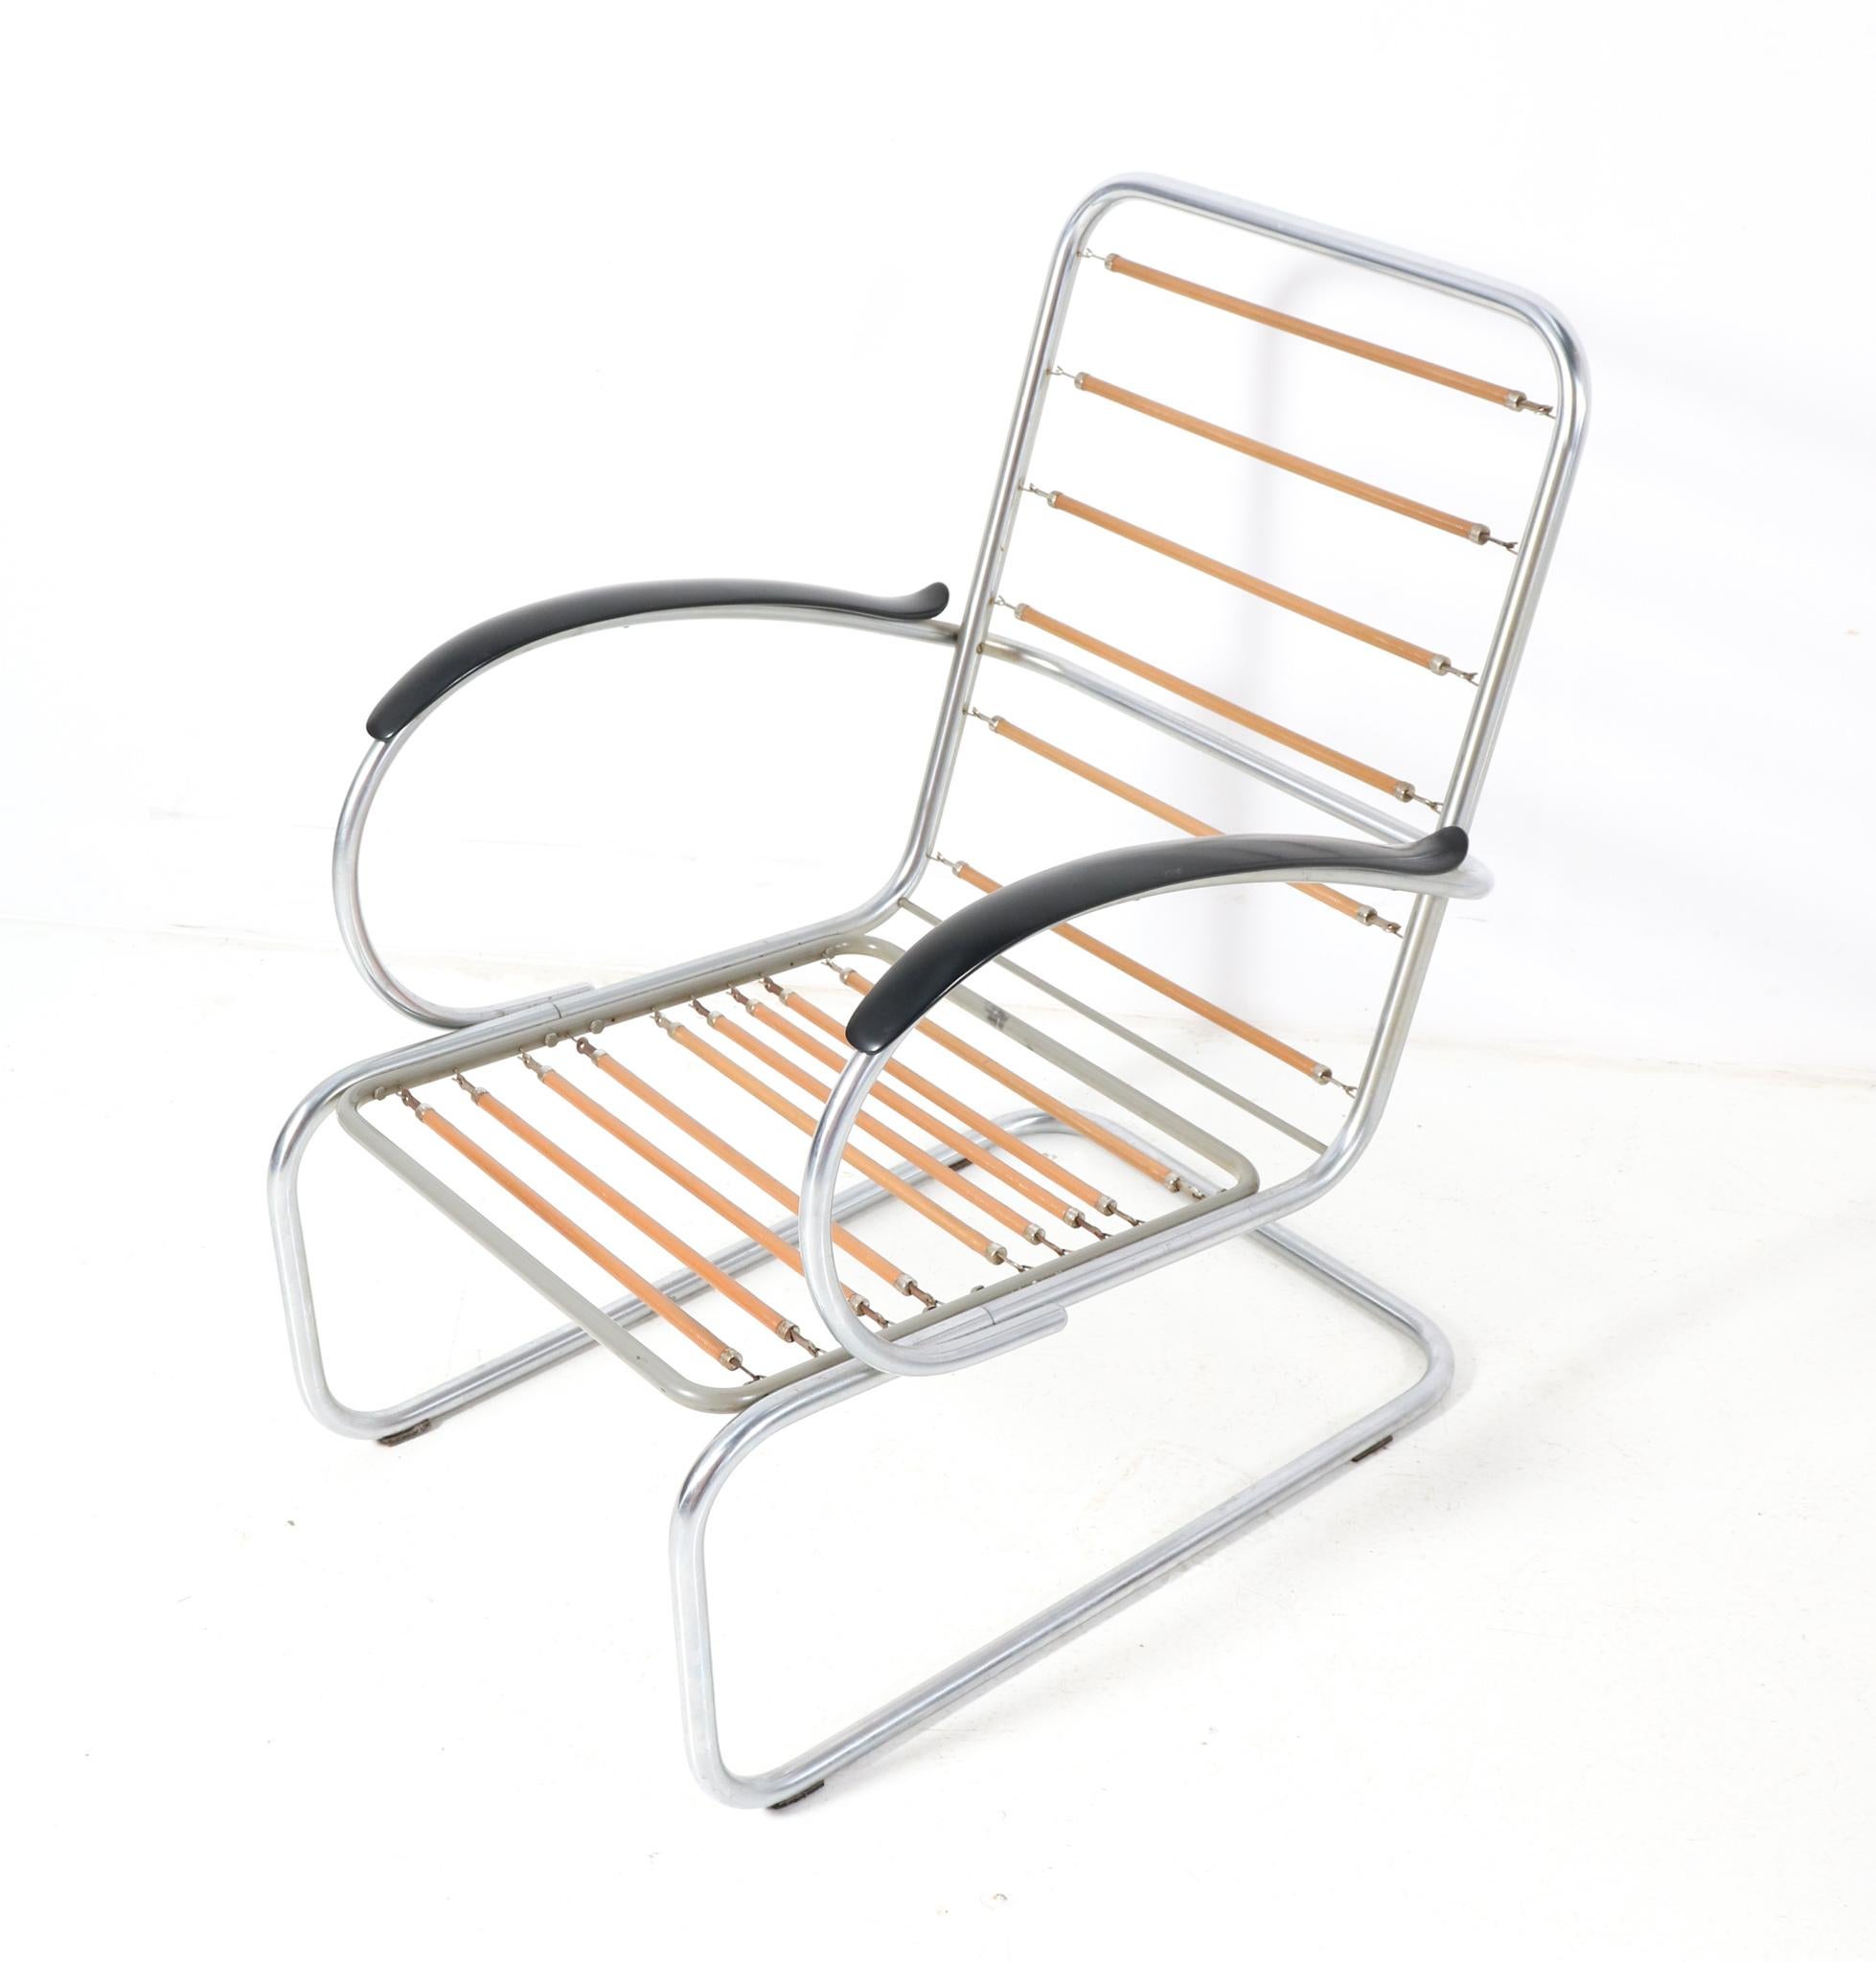 Two Art Deco Bauhaus Model 409 Lounge Chairs by W.H. Gispen for Gispen, 1930s For Sale 2